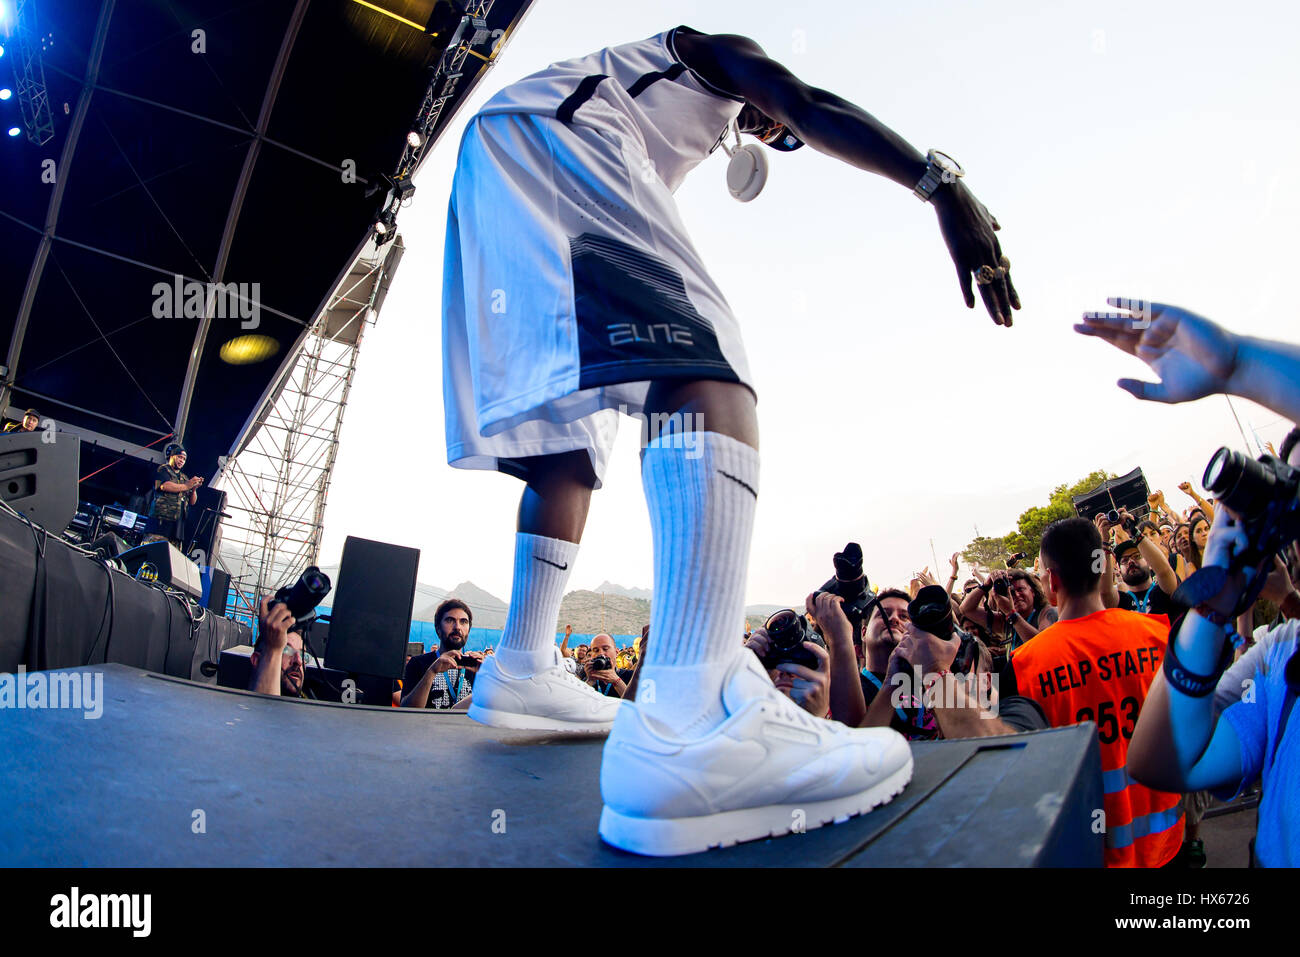 BENICASSIM, SPAIN - JUL 19: Public Enemy (hip hop group) in concert at FIB Festival on July 19, 2015 in Benicassim, Spain. Stock Photo